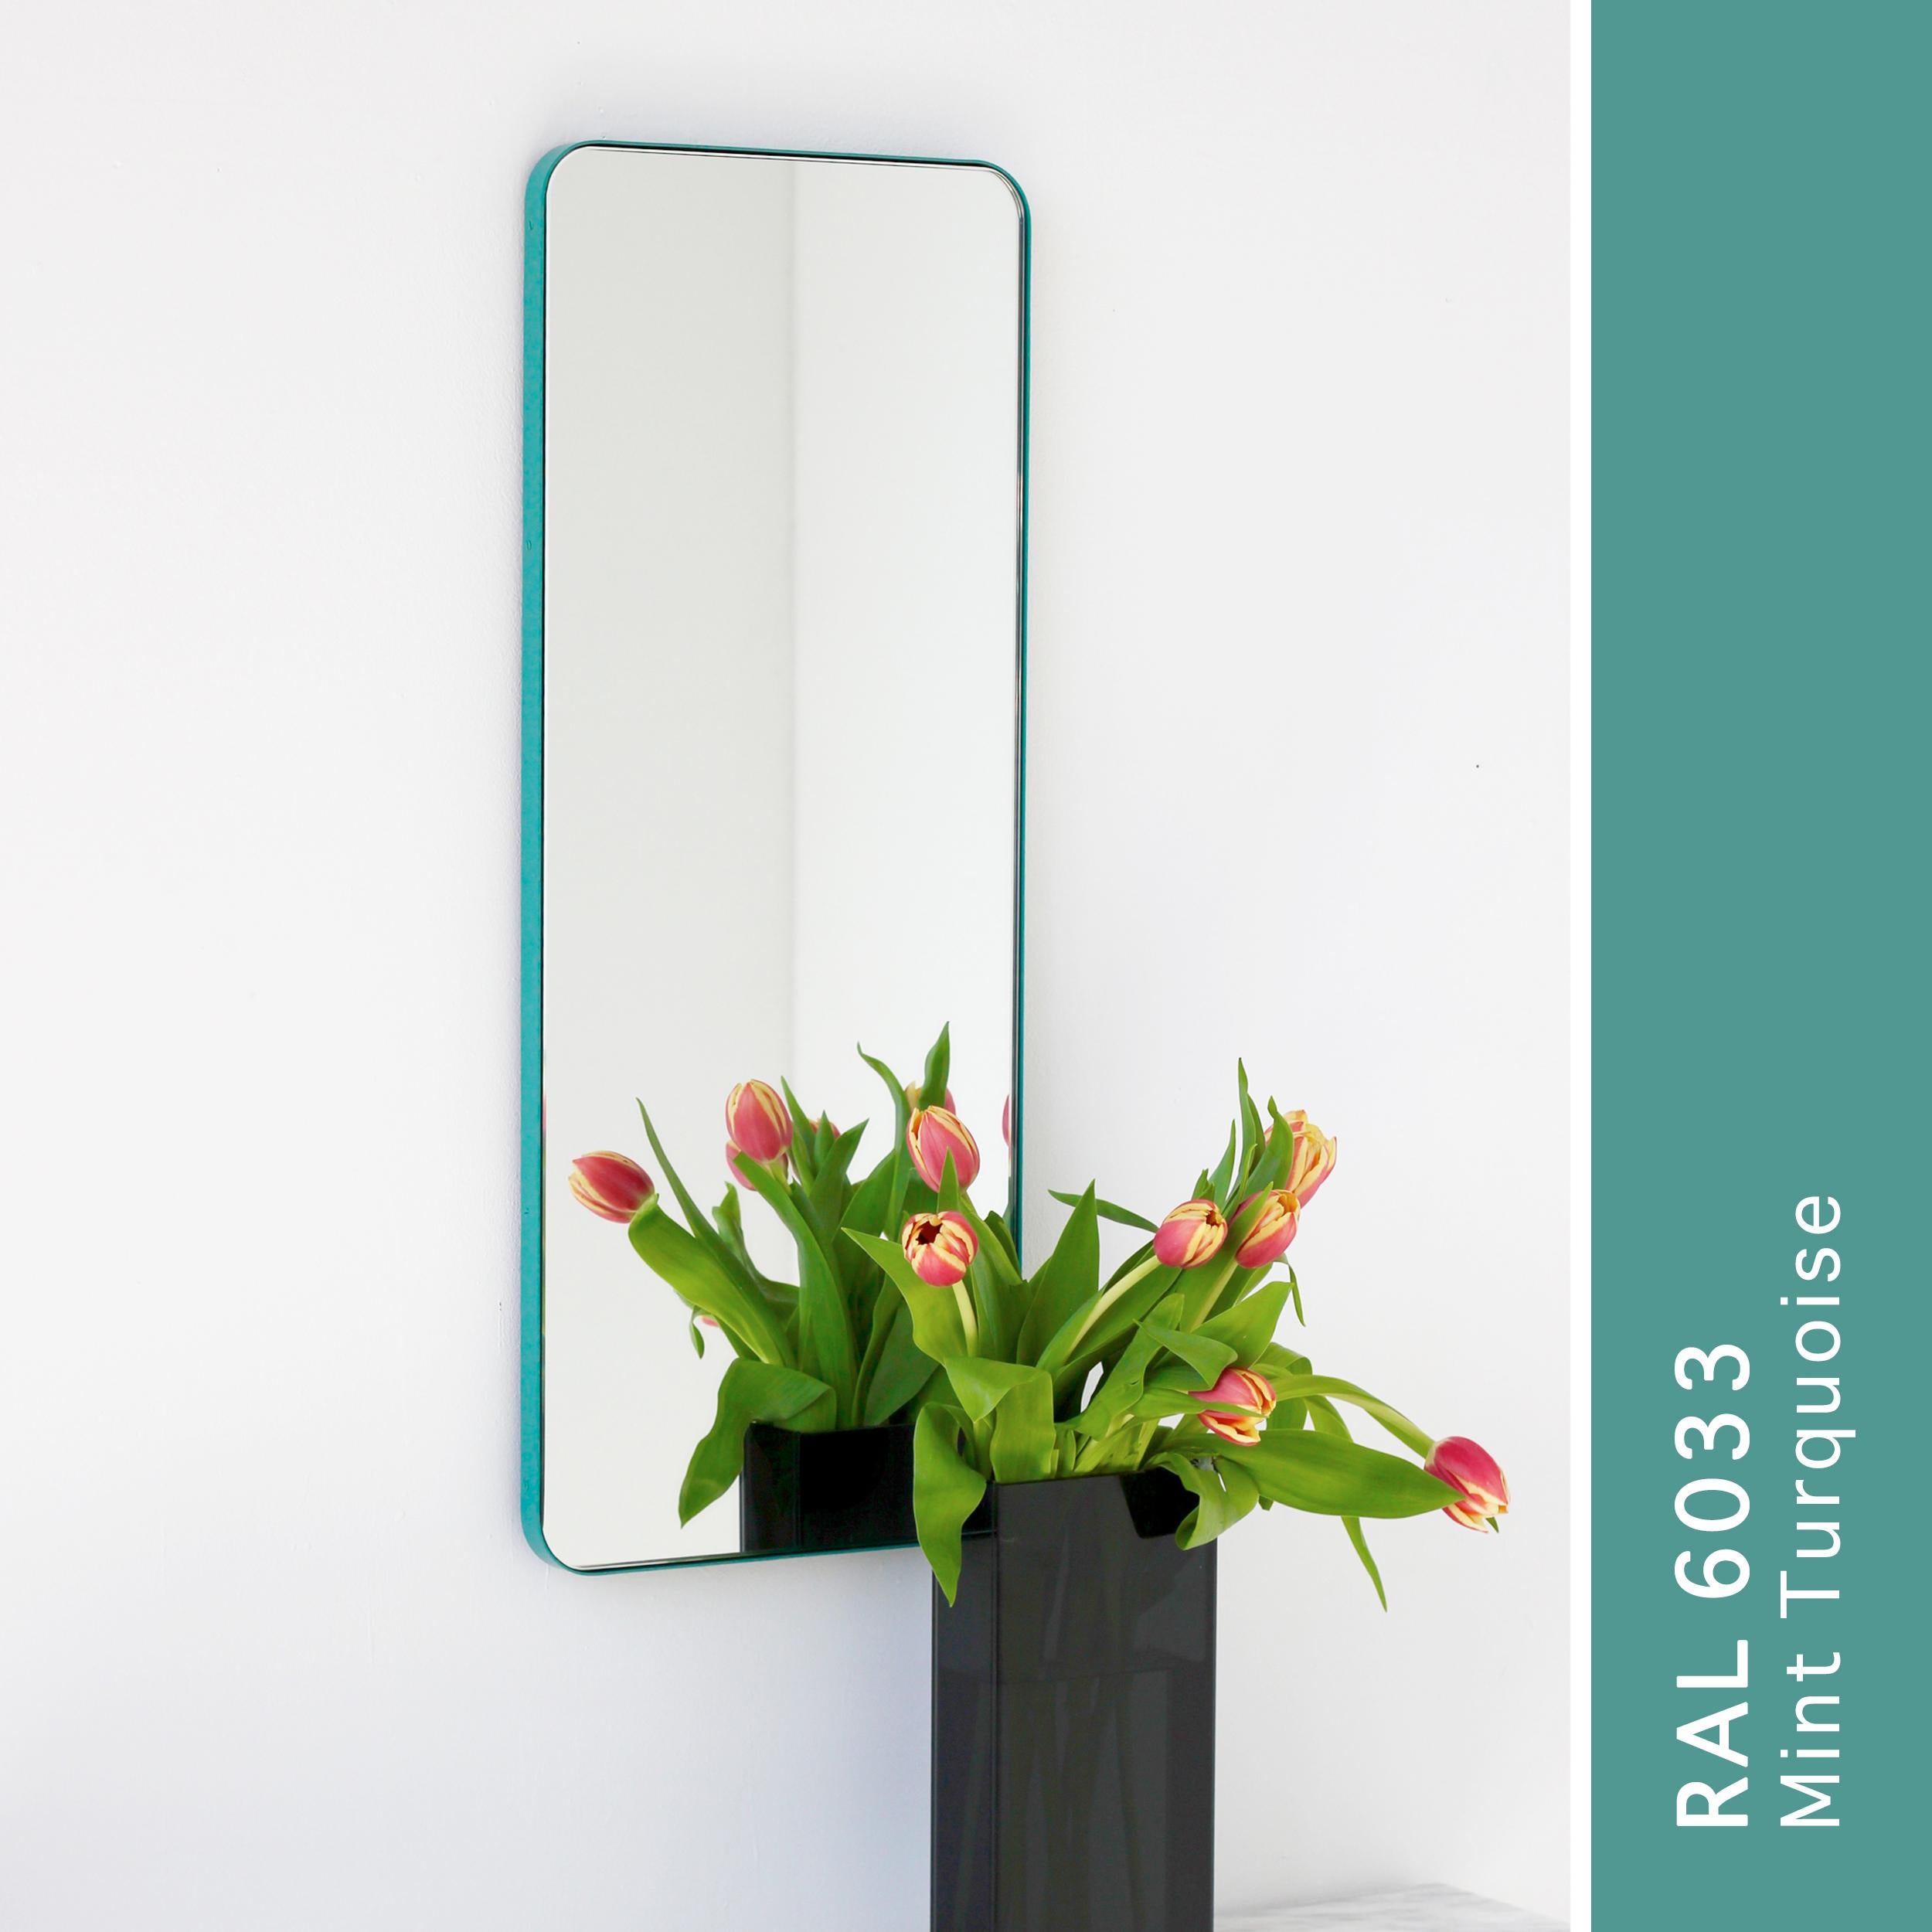 British In Stock Quadris Rectangular Mirror with Mint Turquoise Frame, Small For Sale